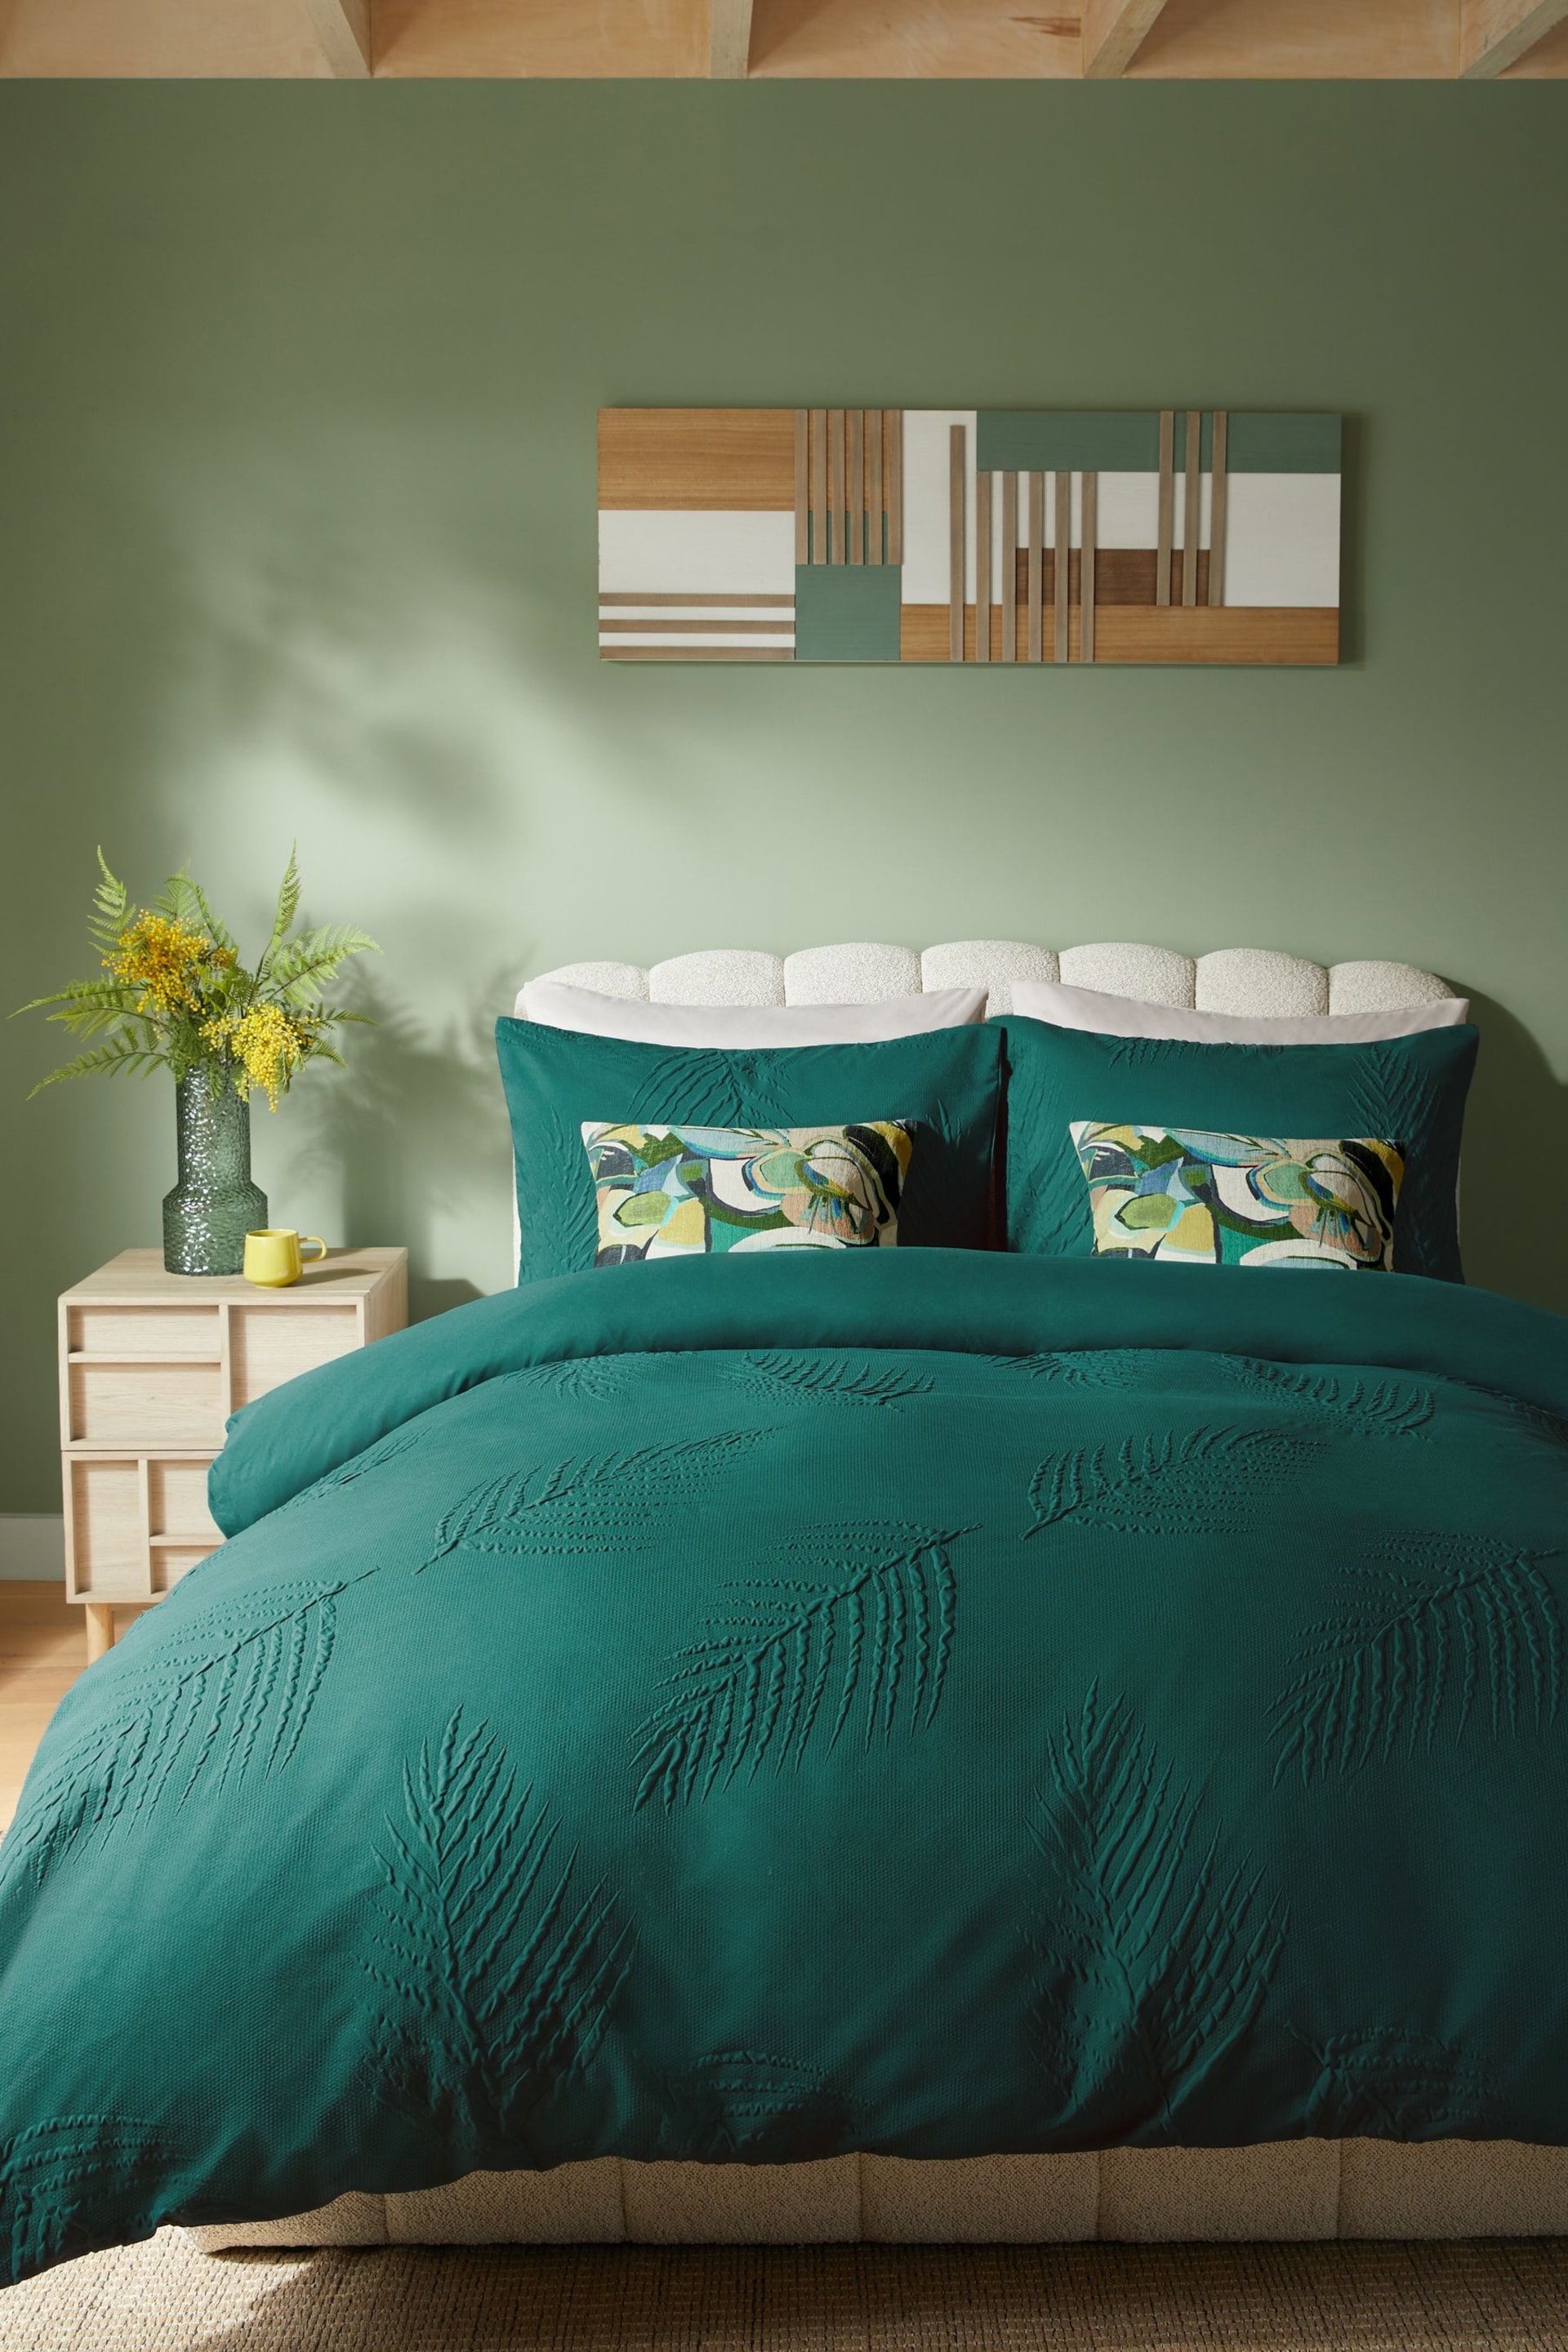 Green Embossed Leaf Duvet Cover and Pillowcase Set - Image 3 of 5